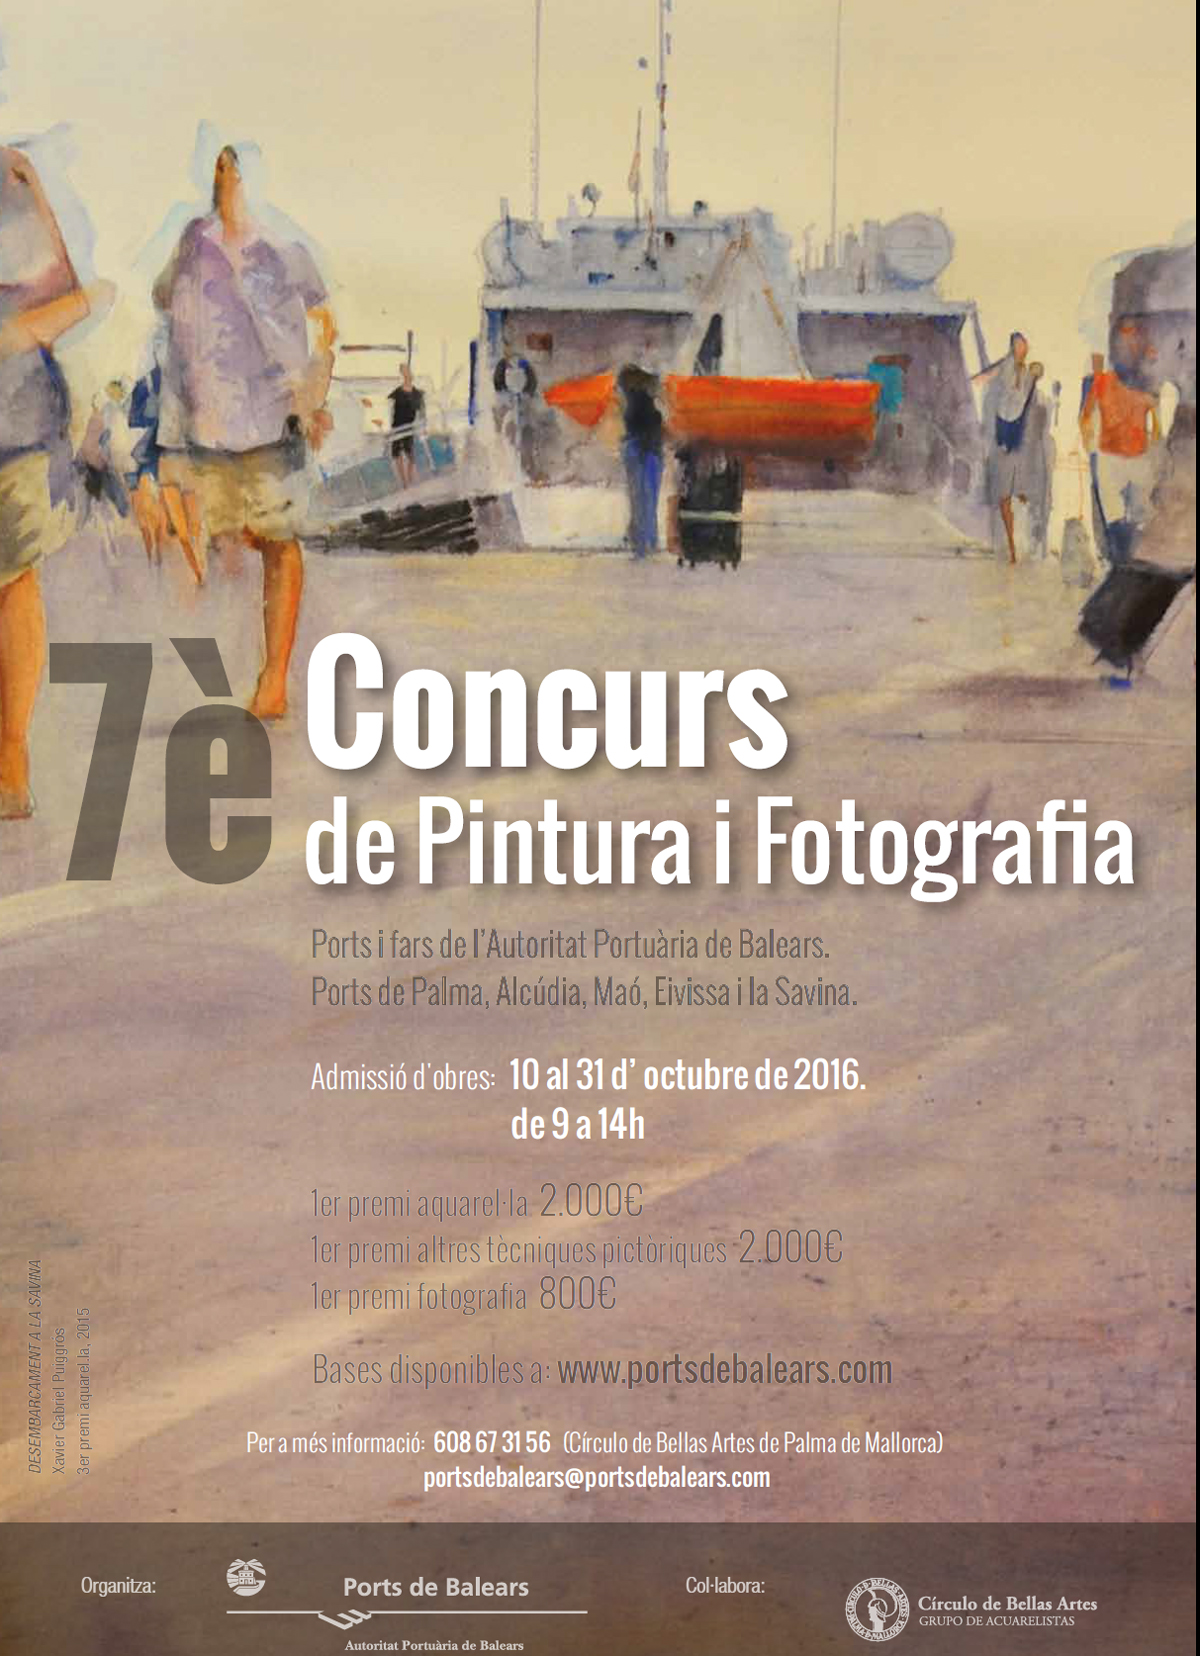 The APB sets up the VII Painting and Photography Contest on Balearic ports and lighthouses